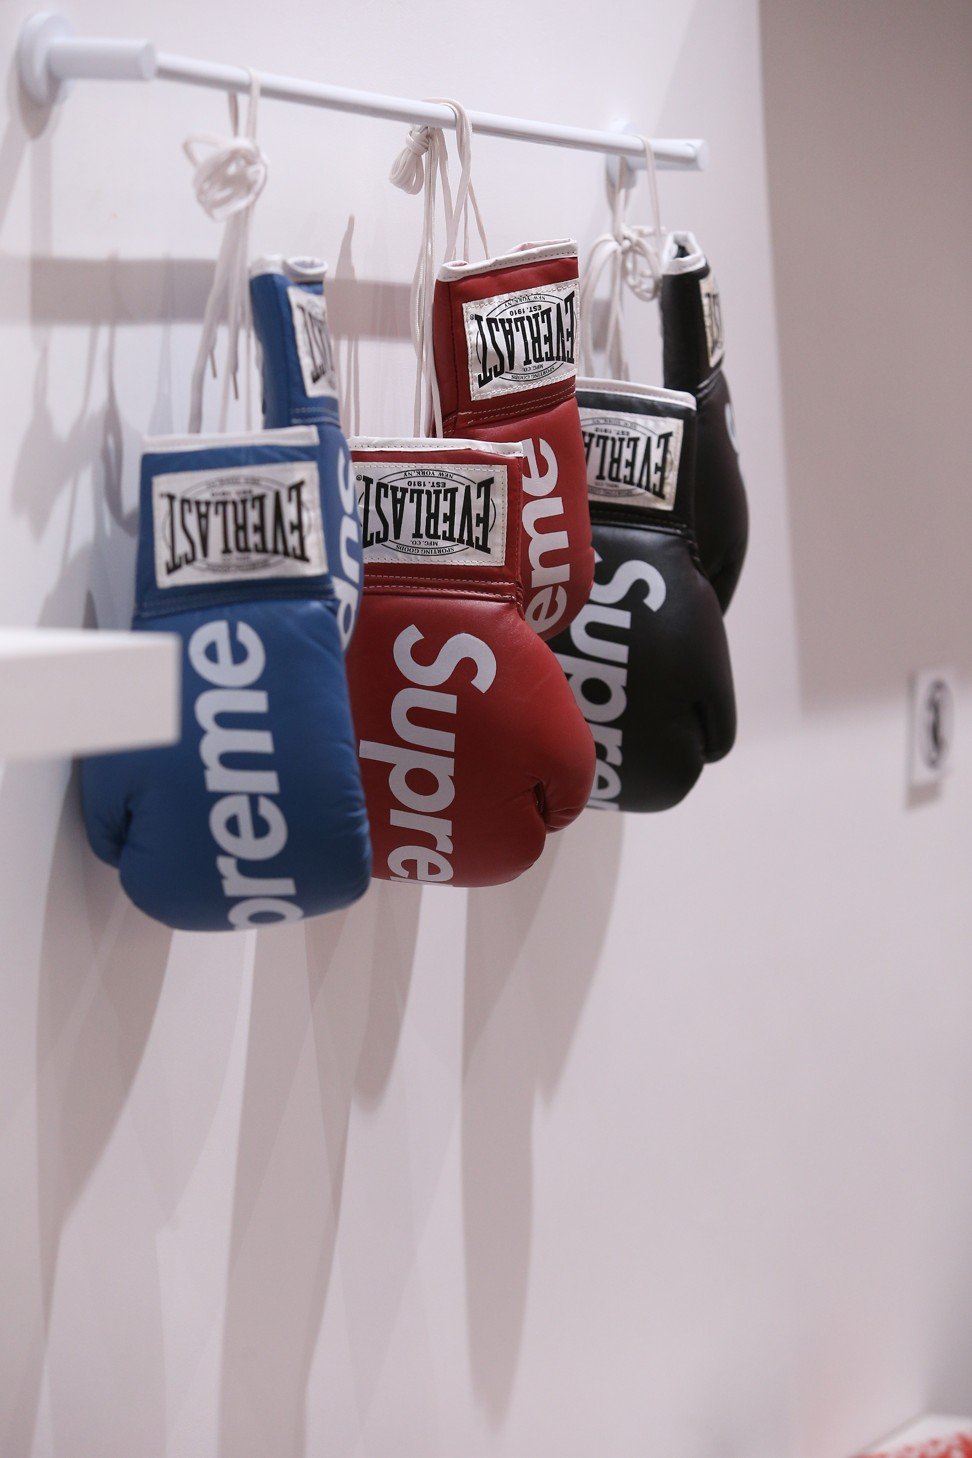 Online auction of private Supreme street wear collection draws millennial  bidders